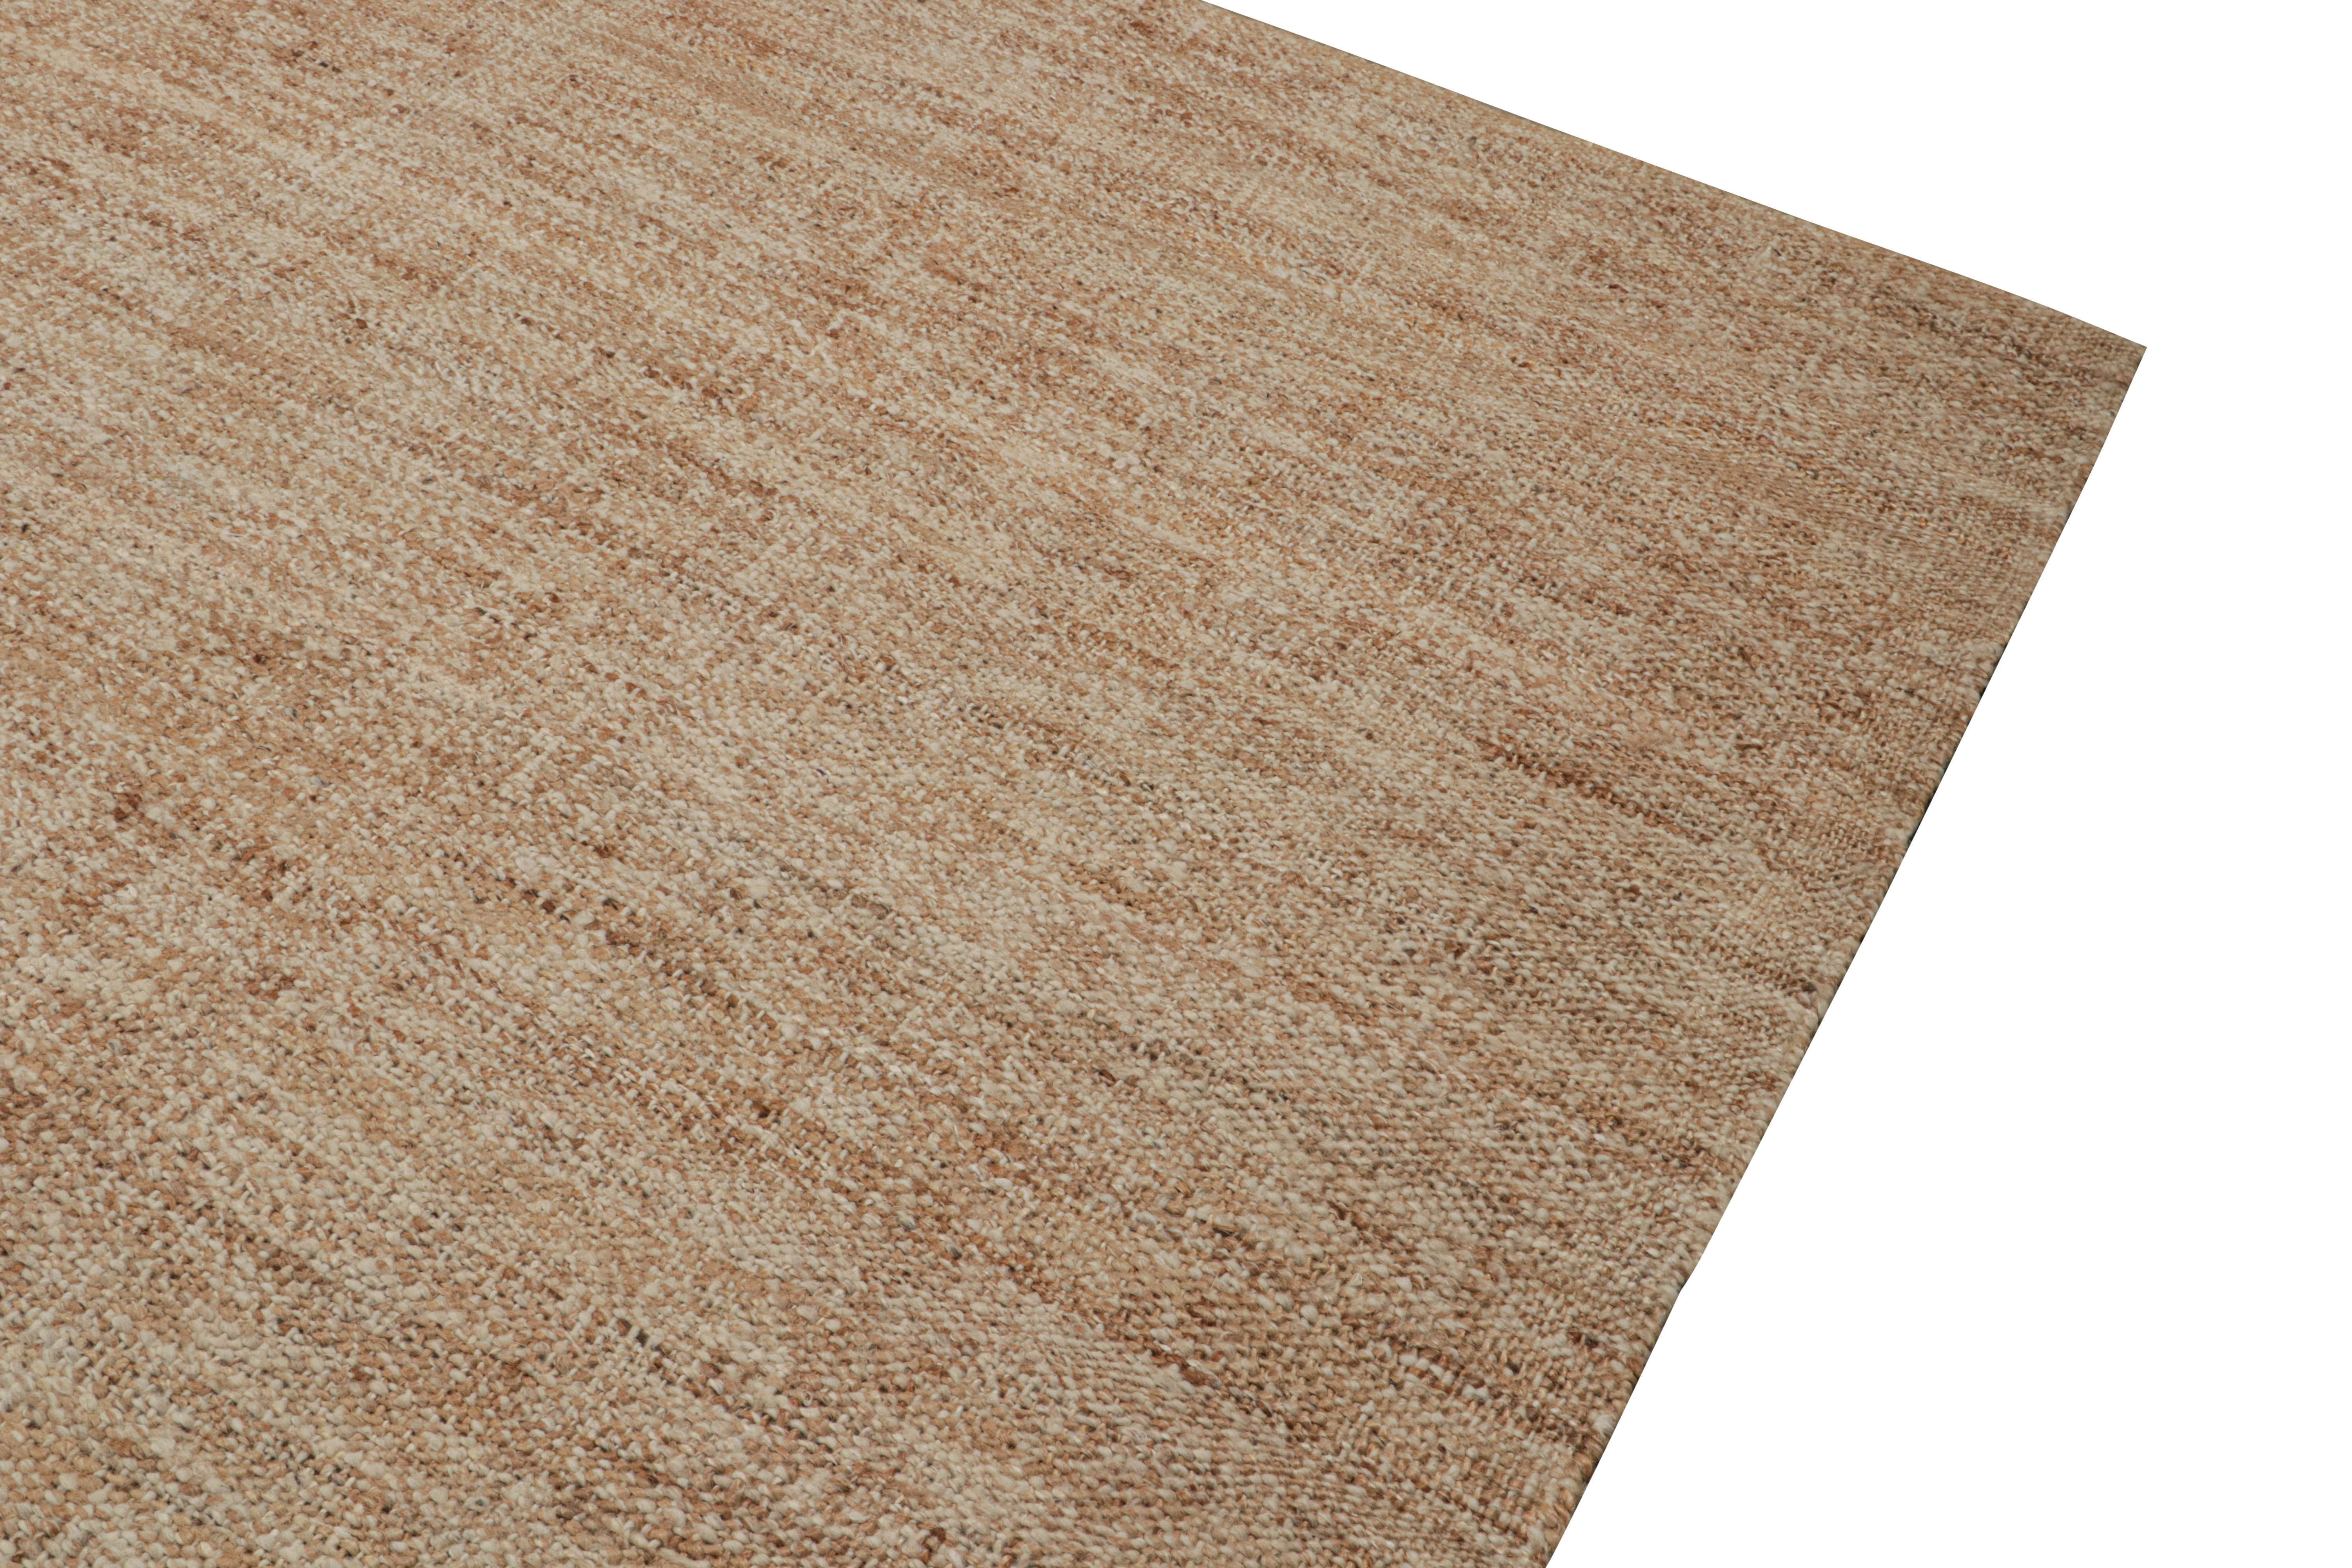 Rug & Kilim’s Contemporary Jute kilim in Beige-Brown In New Condition For Sale In Long Island City, NY